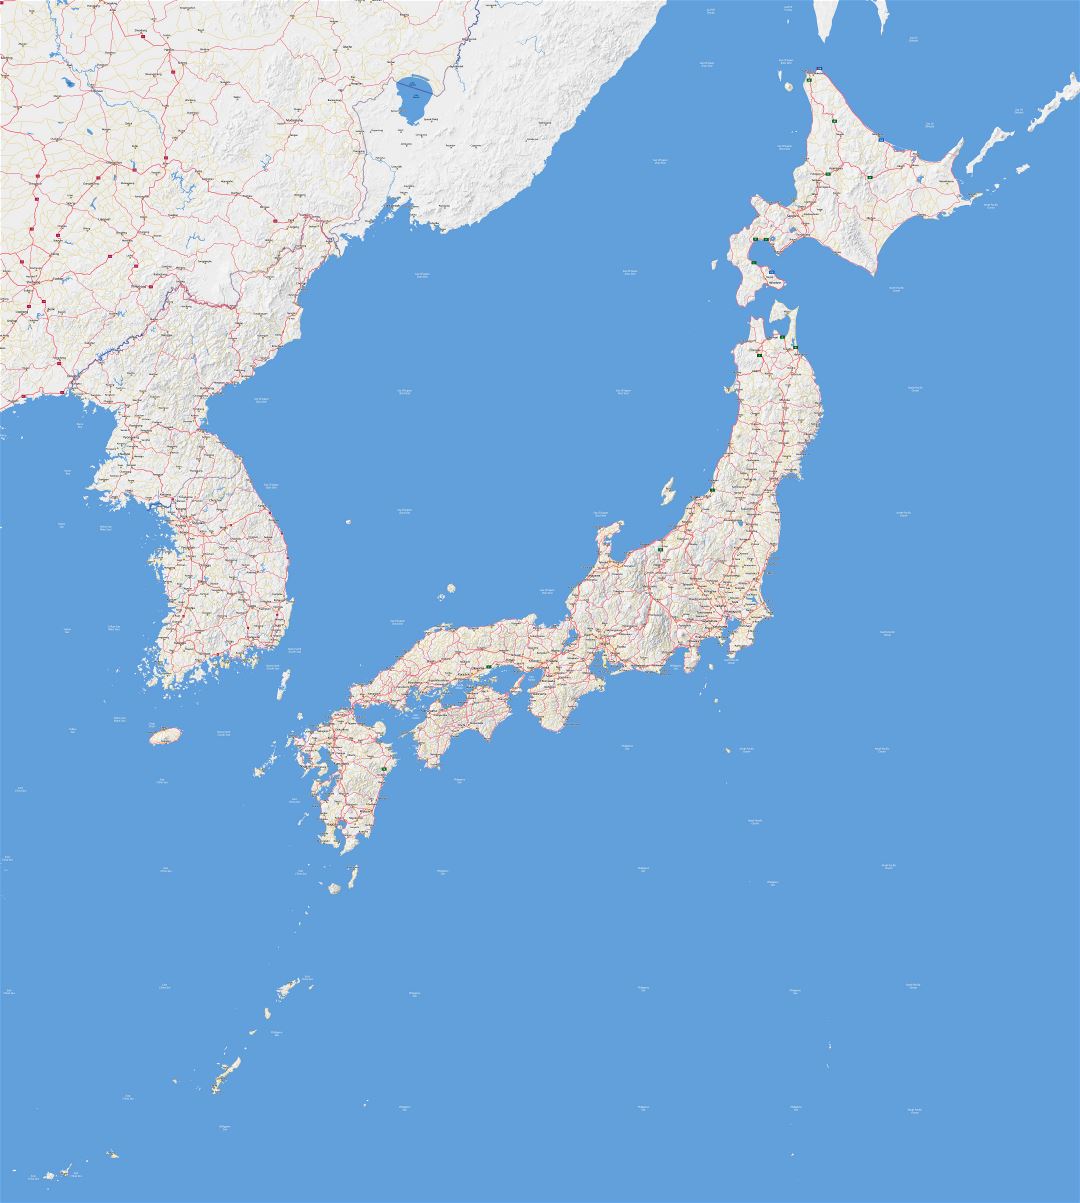 Large scale road map of Japan with relief and all cities